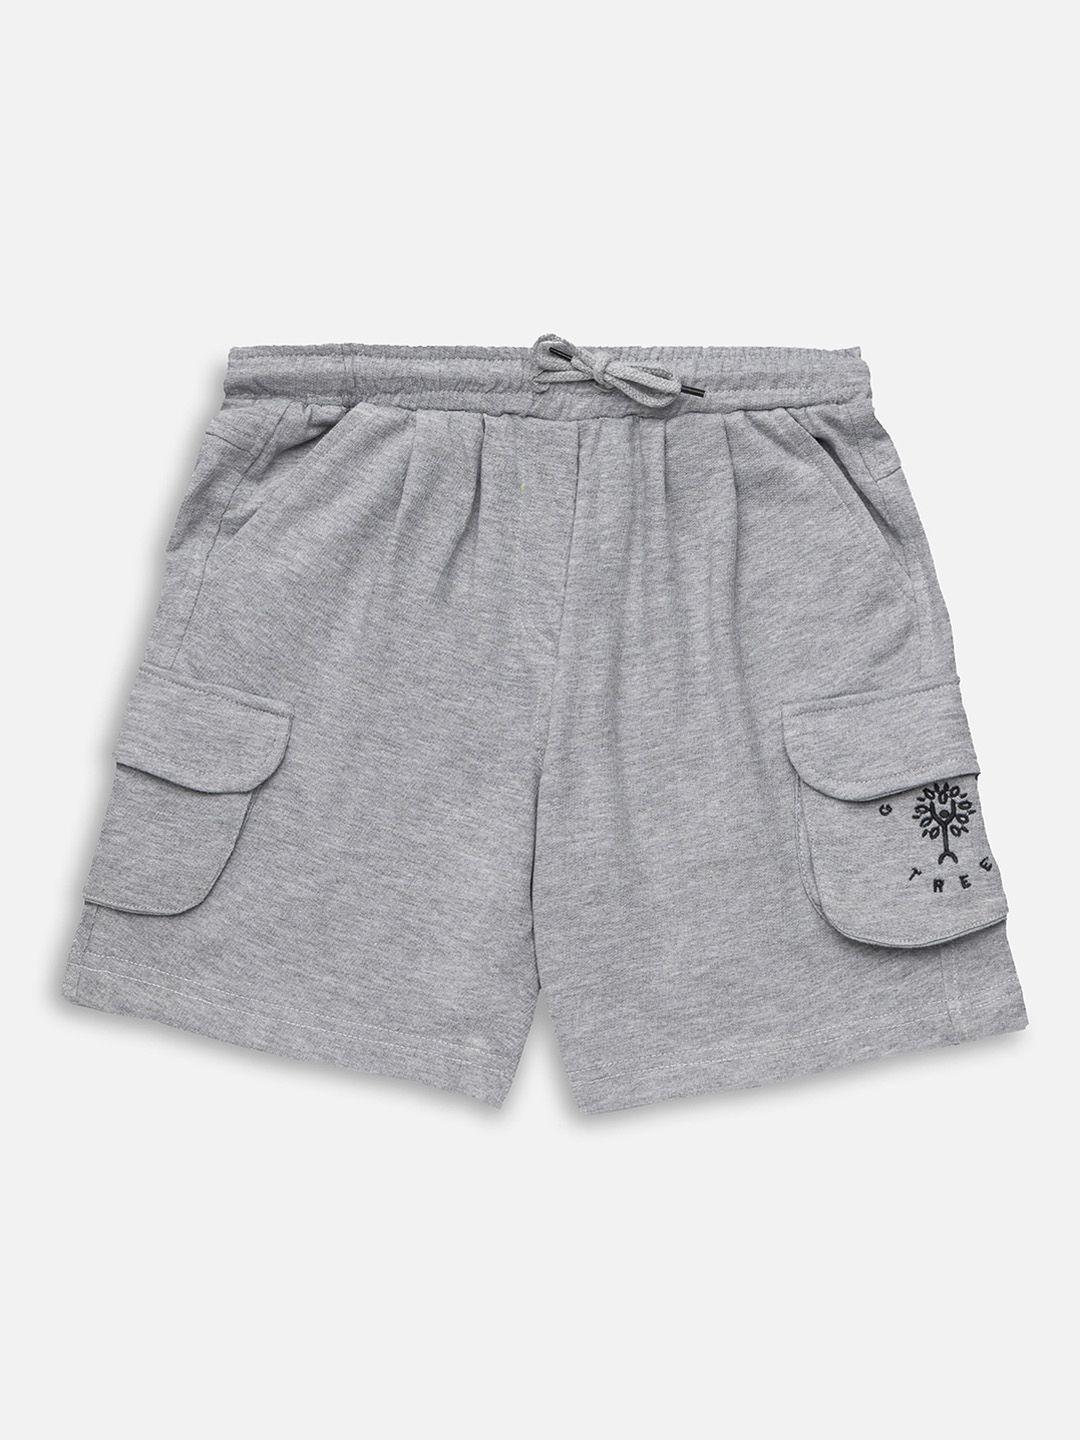 growing tree unisex kids grey melange outdoor antimicrobial technology shorts